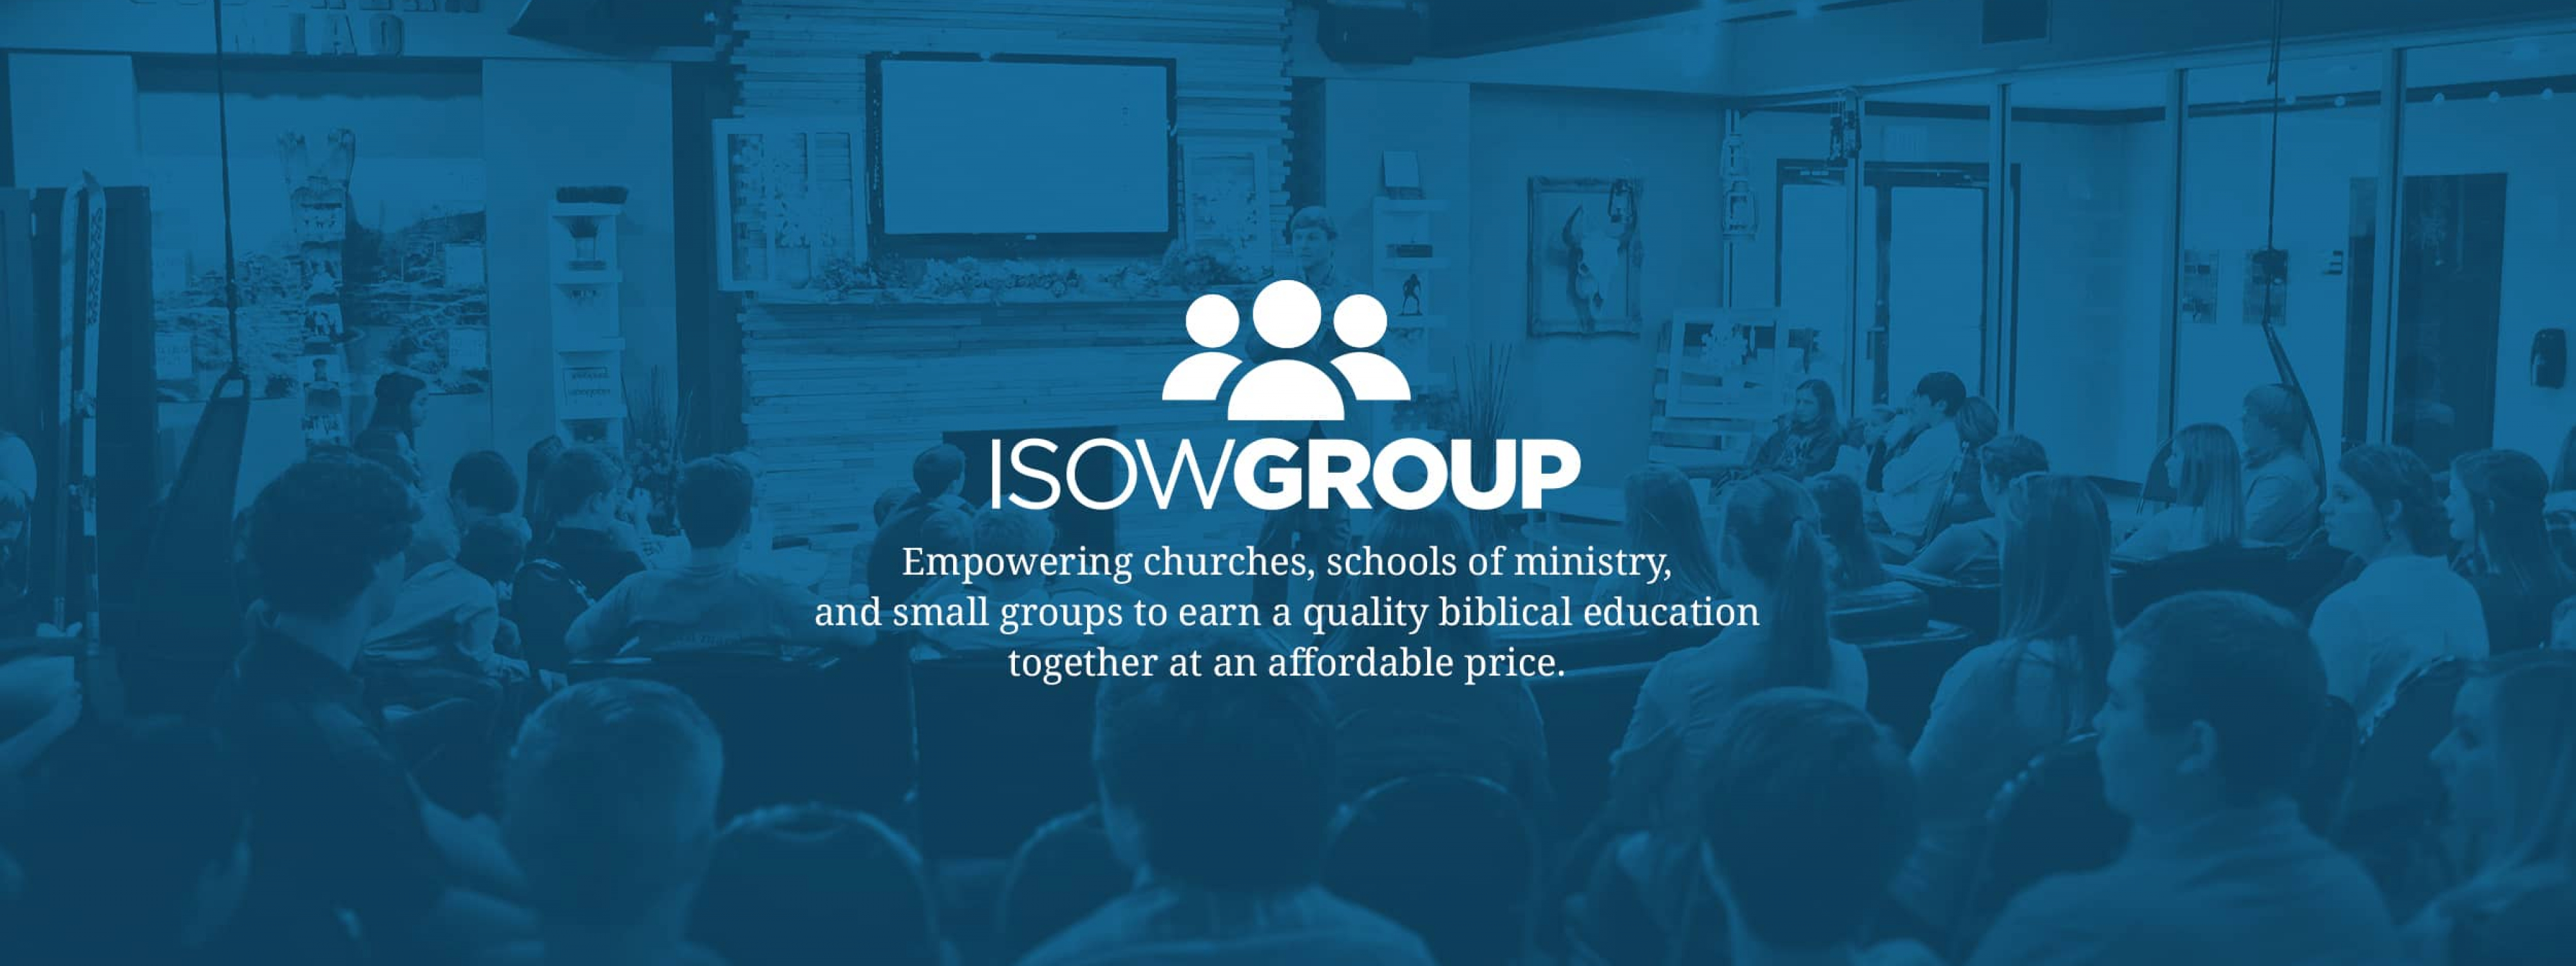 ISOW Group Banner 2